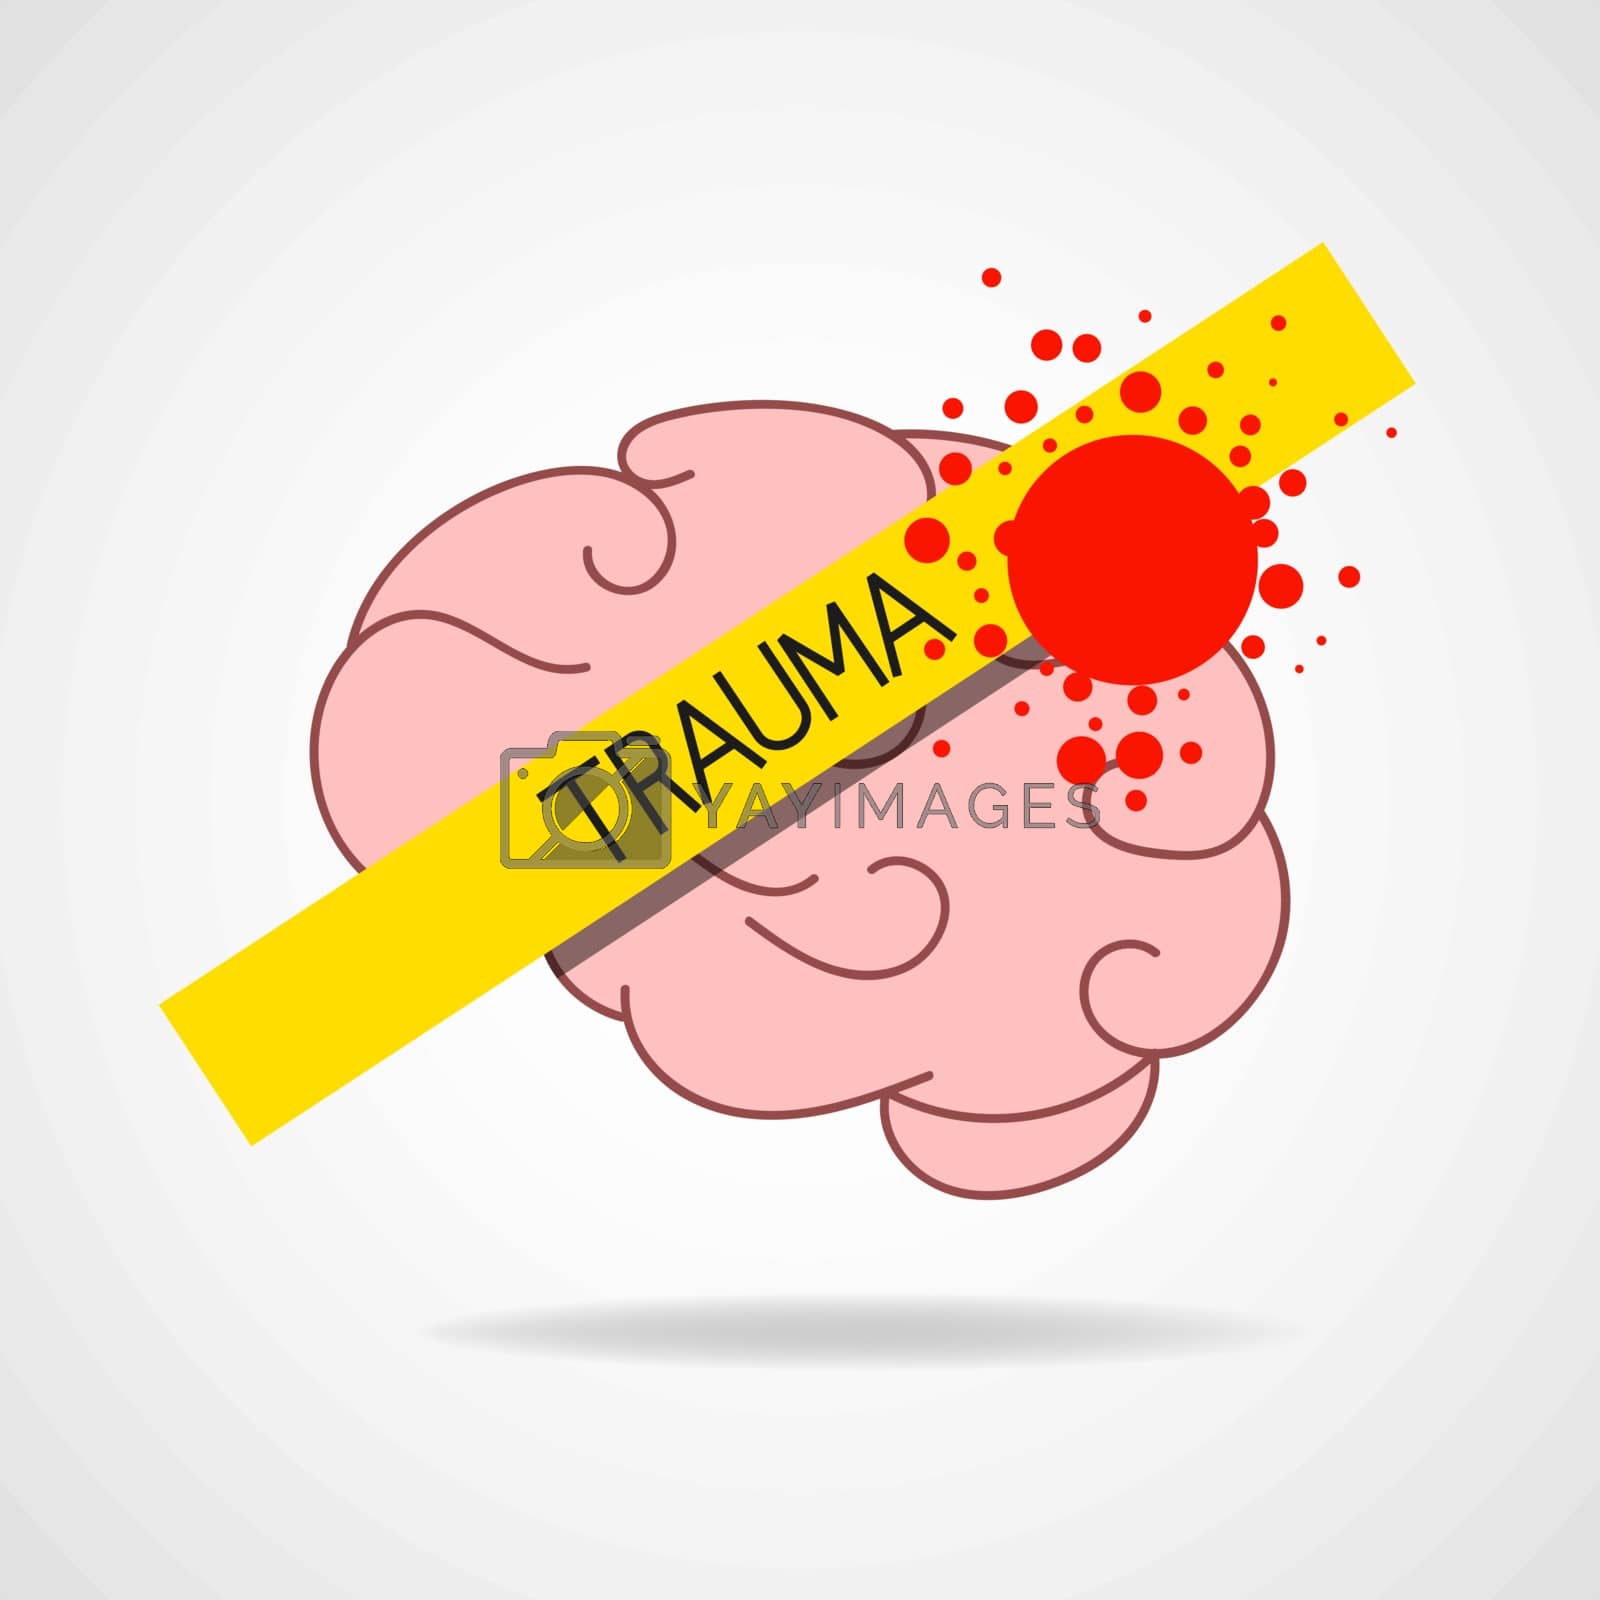 Royalty free image of Mental Disorder Icon. Brain Disease, Trauma, Dementia. Alzheimer Concept. Vector Illustration Can Be Used For Topics Like Psychology, Mental Health, Medicine by IaroslavBrylov